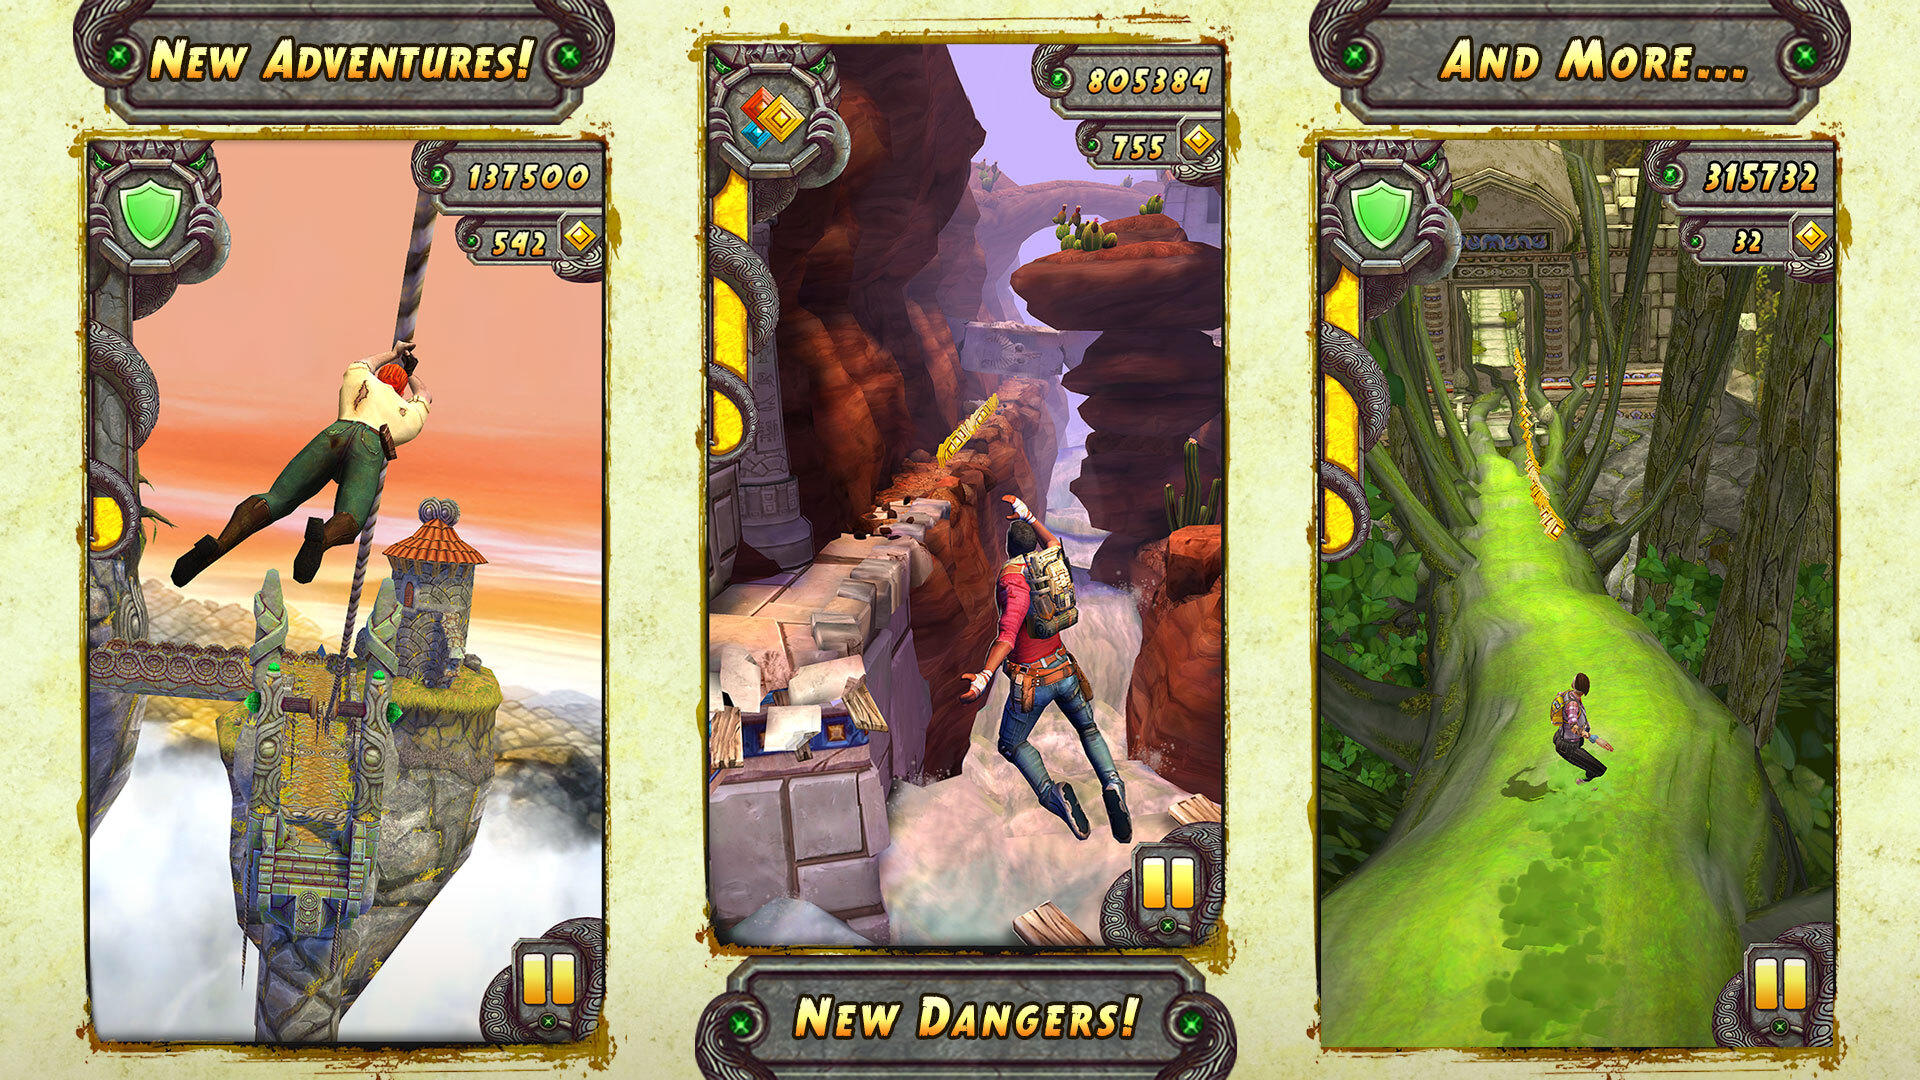 Temple Run – Best free iPhone game?